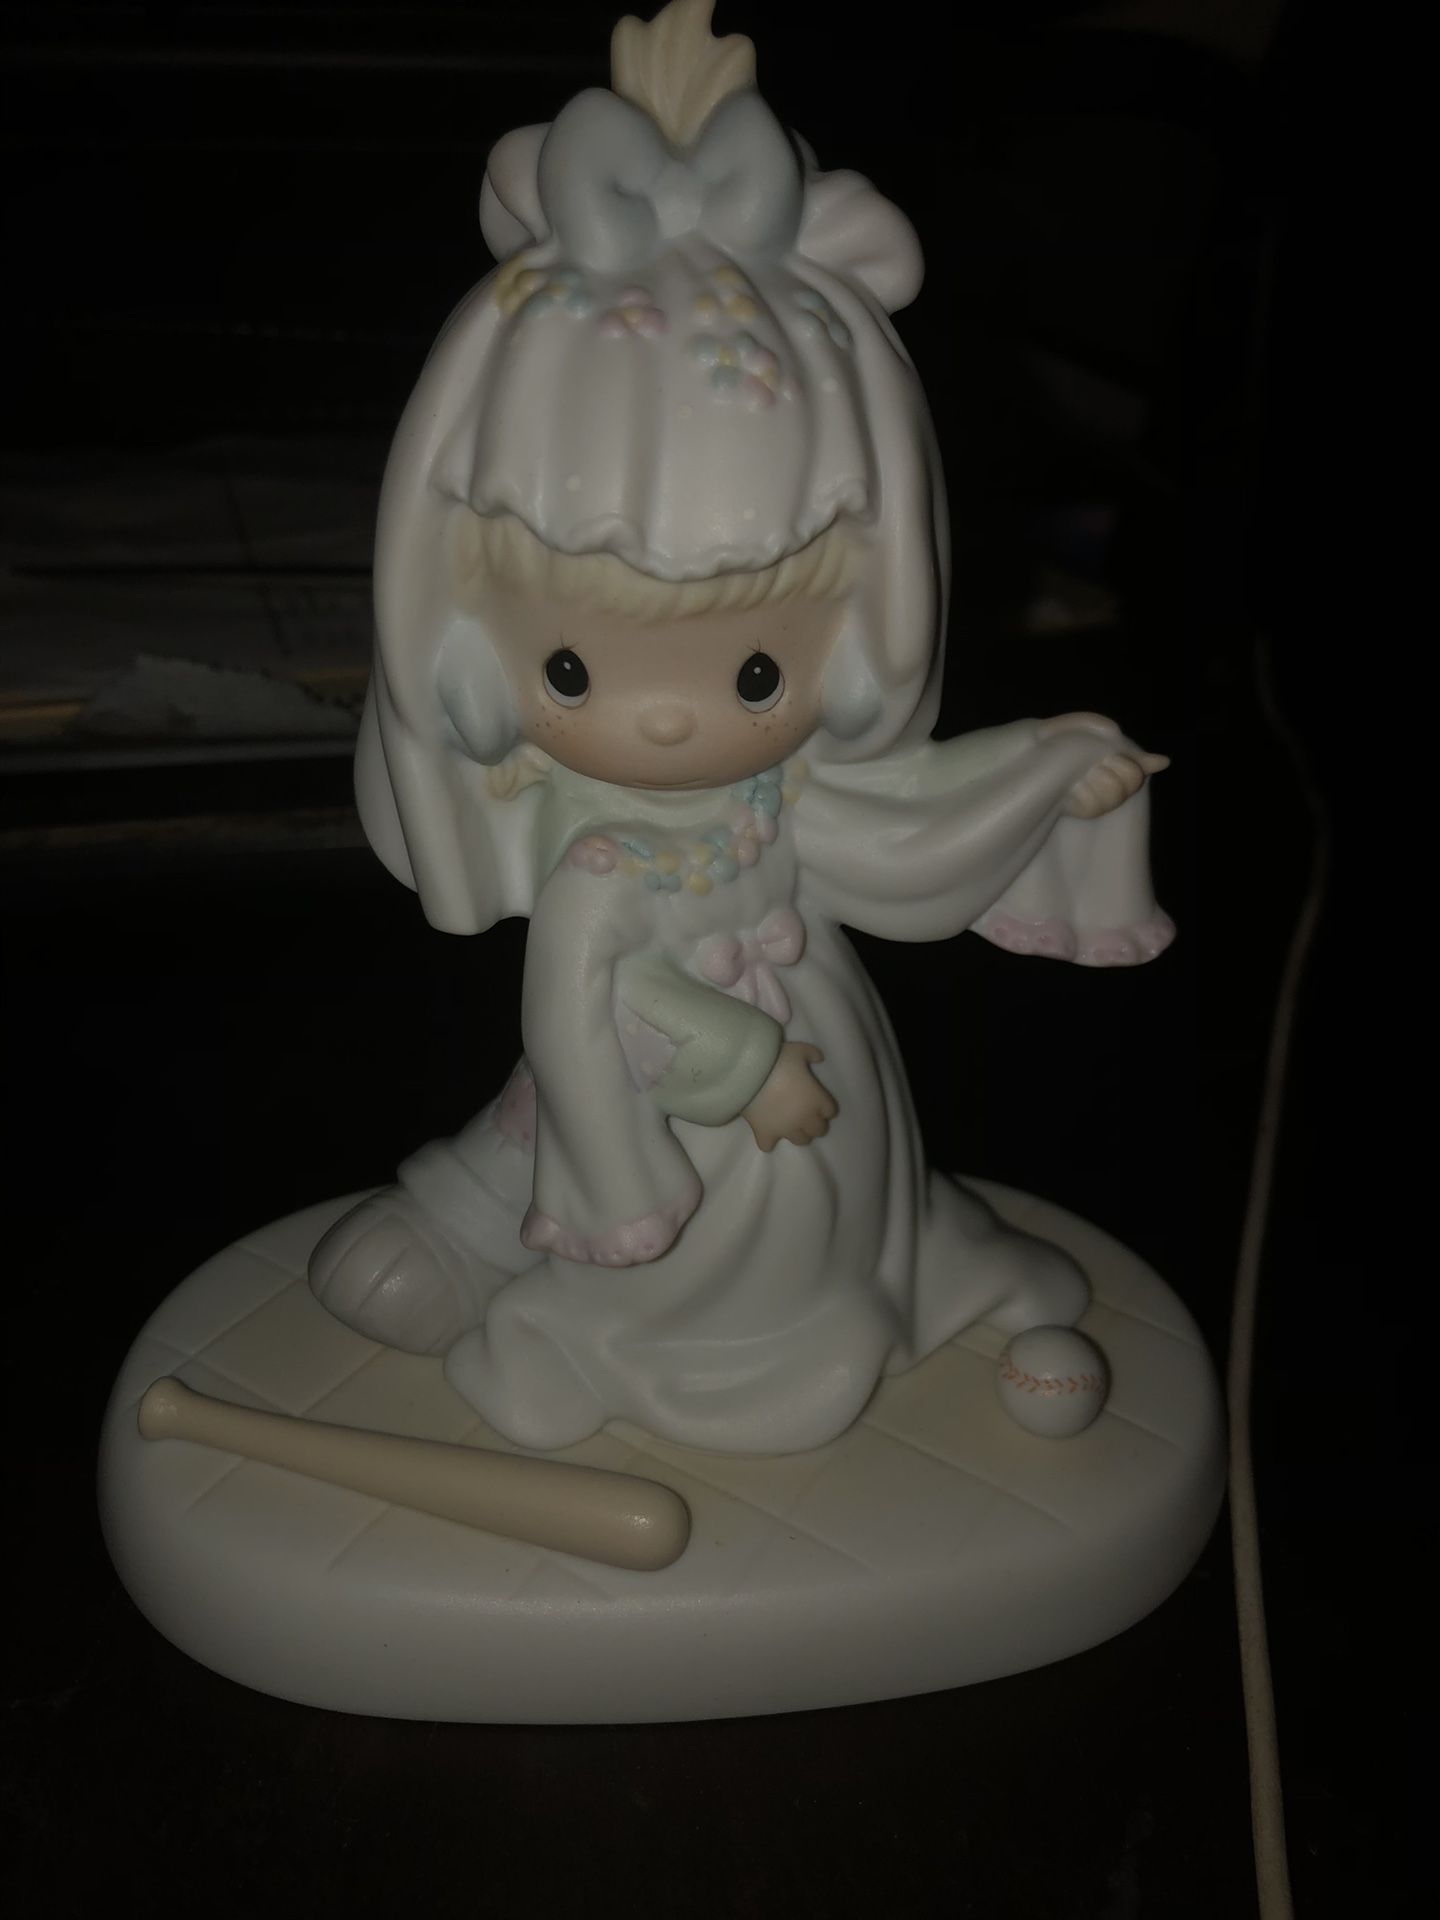 Precious Moments 1988 Collection “Someday My Love” Figurine***Local Pickup Only***